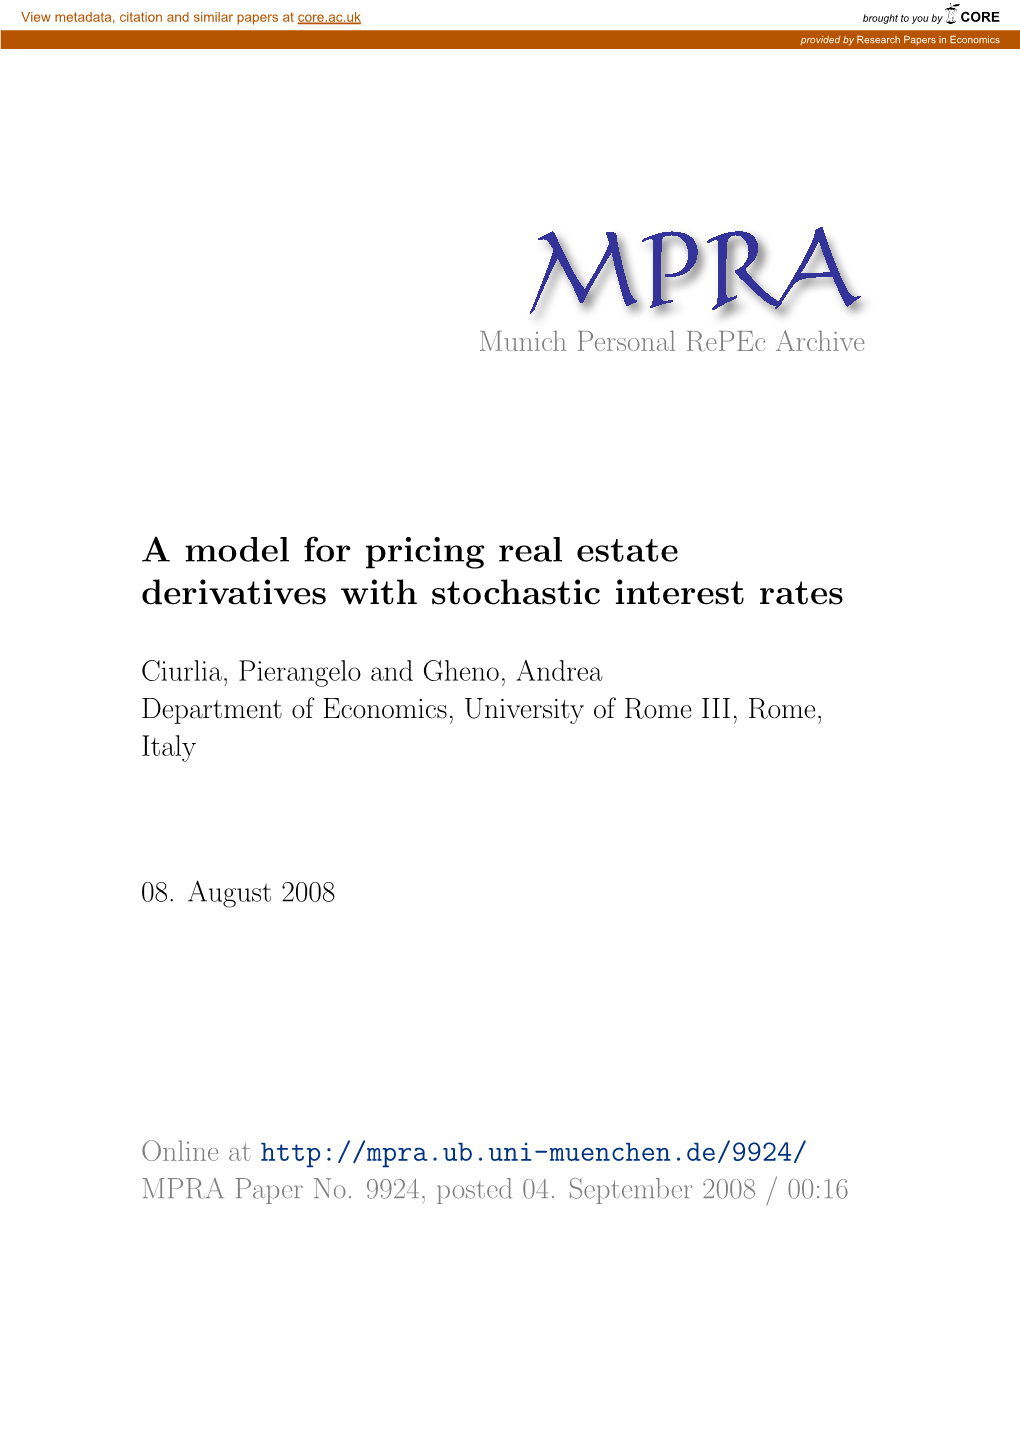 A Model for Pricing Real Estate Derivatives with Stochastic Interest Rates